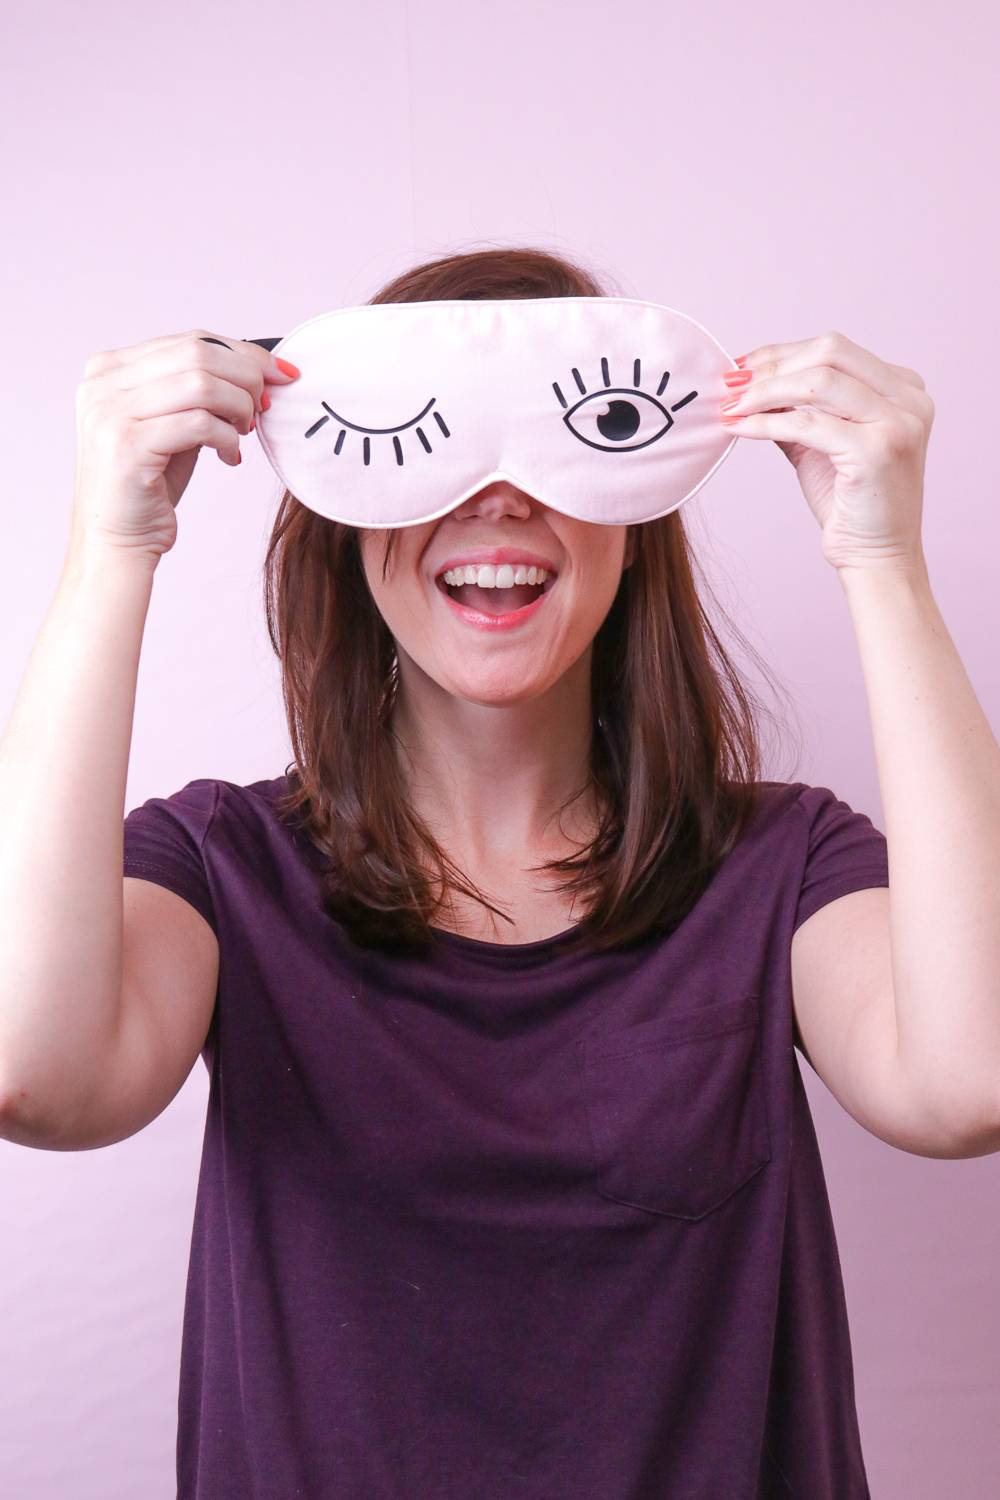 A woman holding an eye mask over her face with an open and closed eye on it.